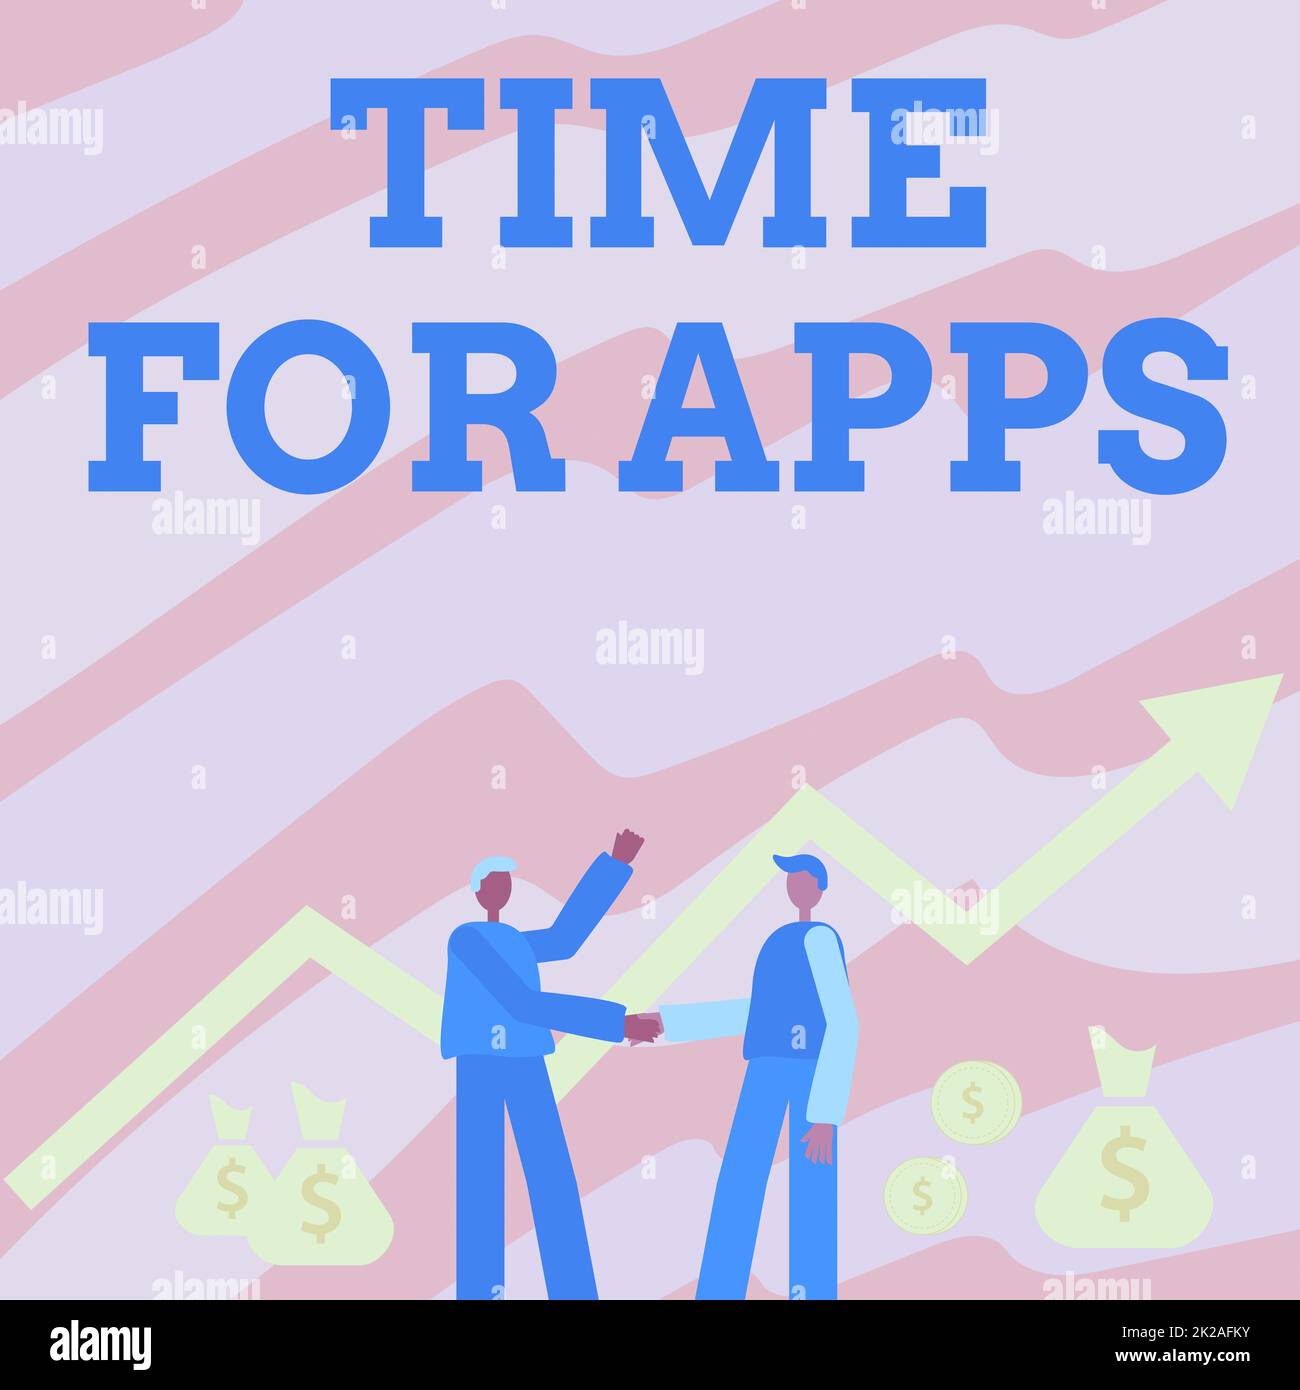 Inspiration showing sign Time For Apps. Business approach make use of application or services using the technologies Two Men Standing Shaking Hands With Financial Arrow For Growth And Money Bags. Stock Photo